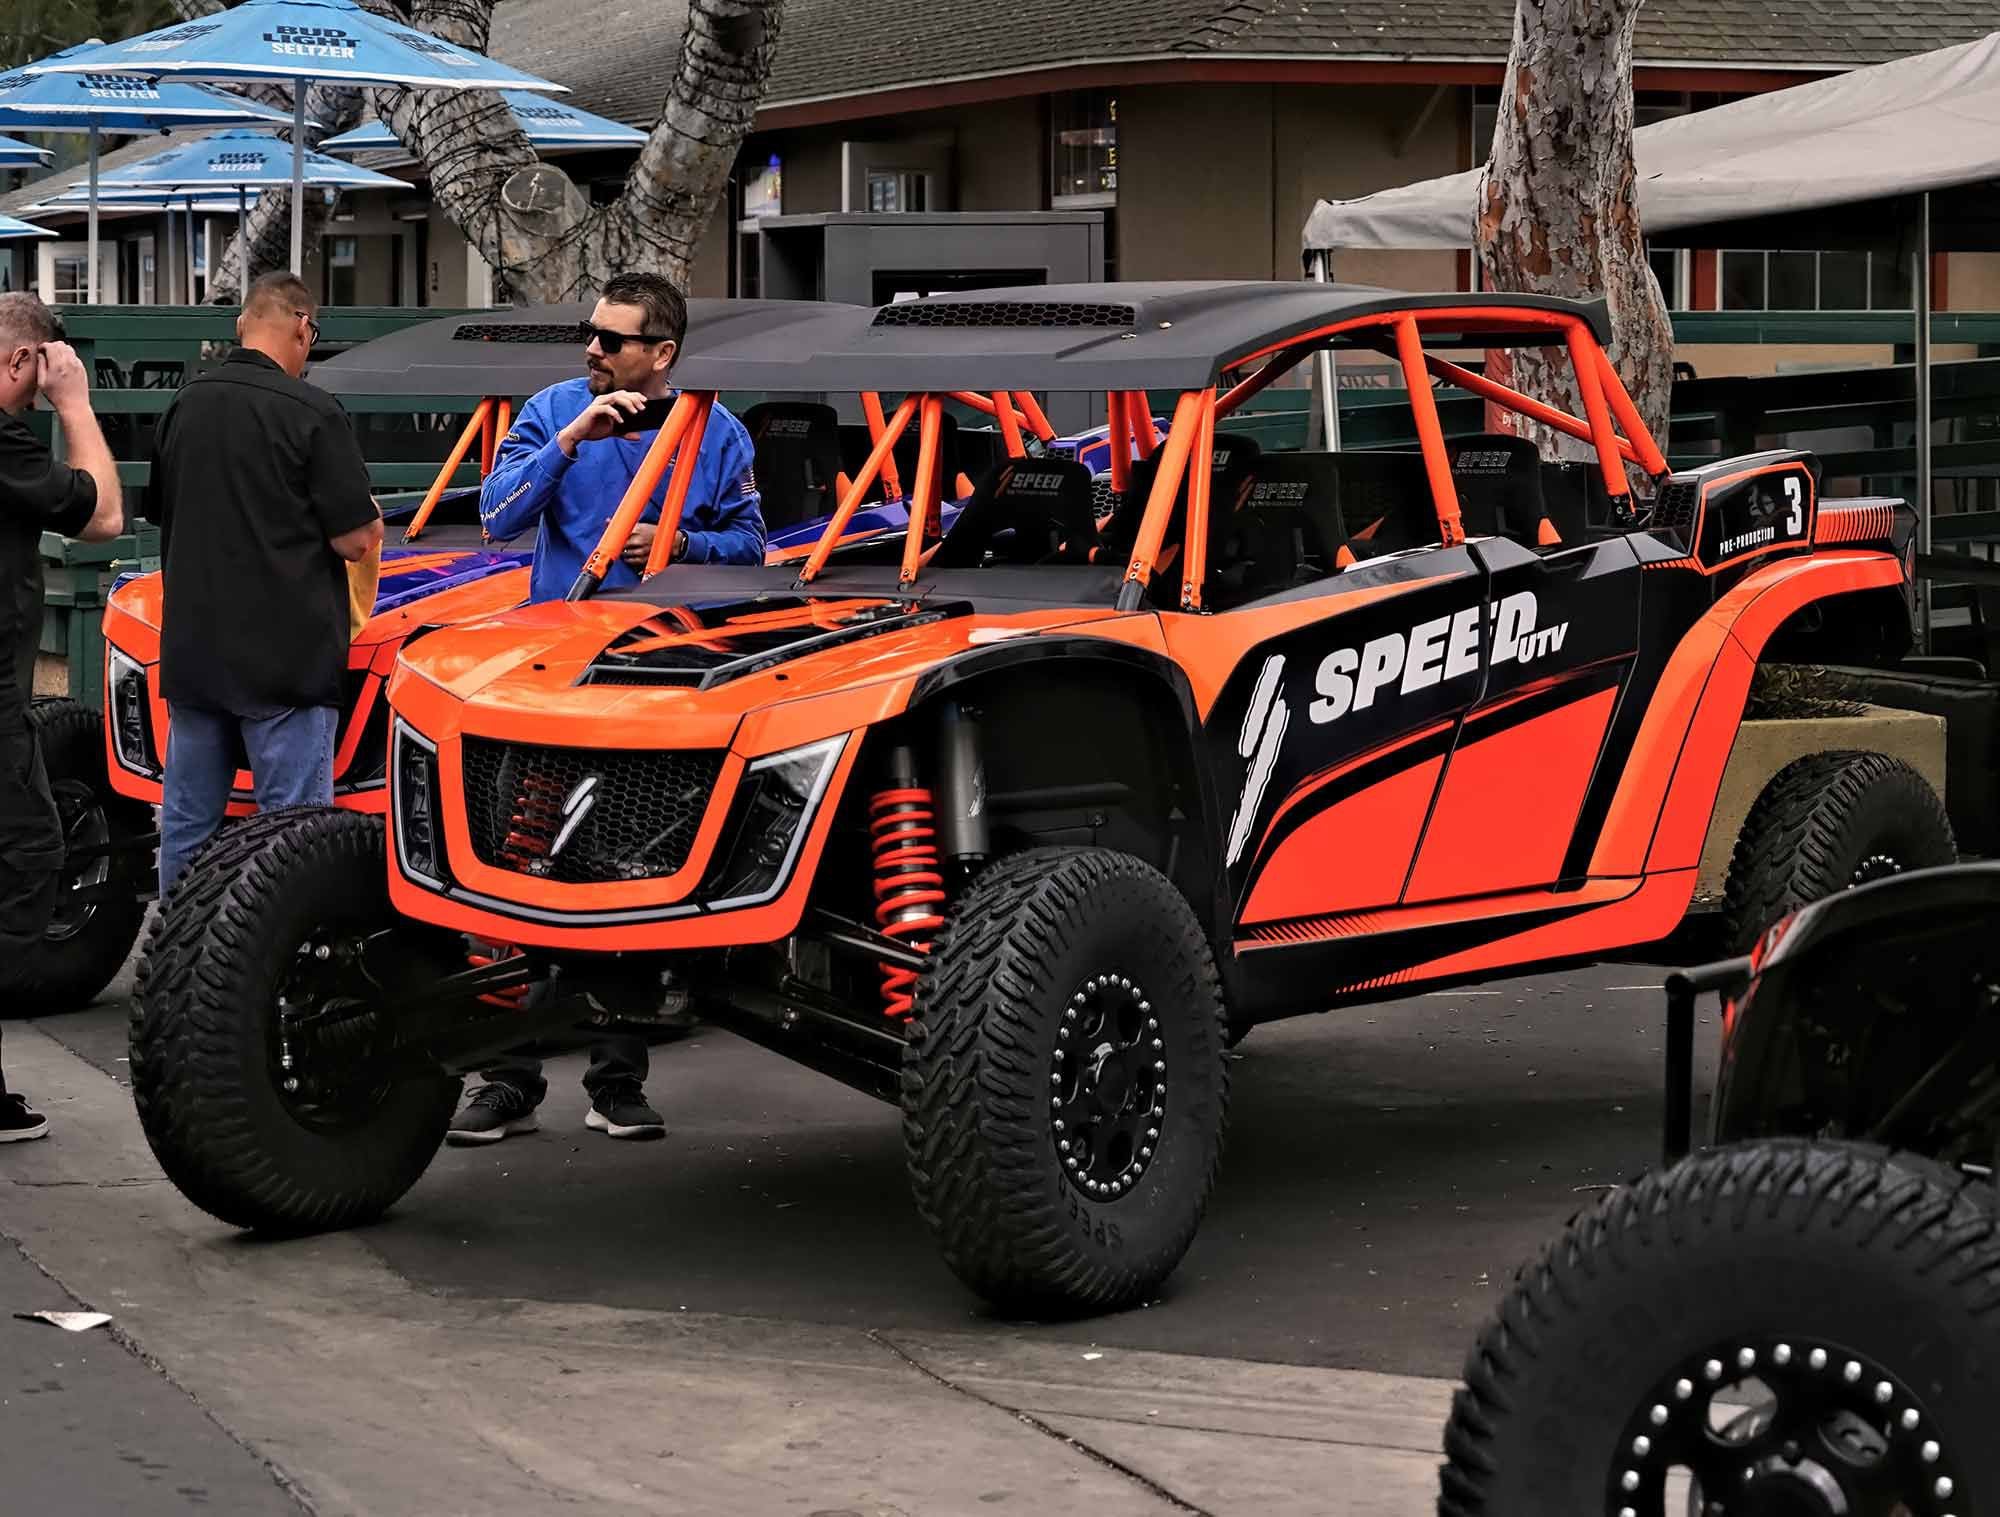 While not in production yet, Speed UTV promises big things with a race-bred chassis and big horsepower.